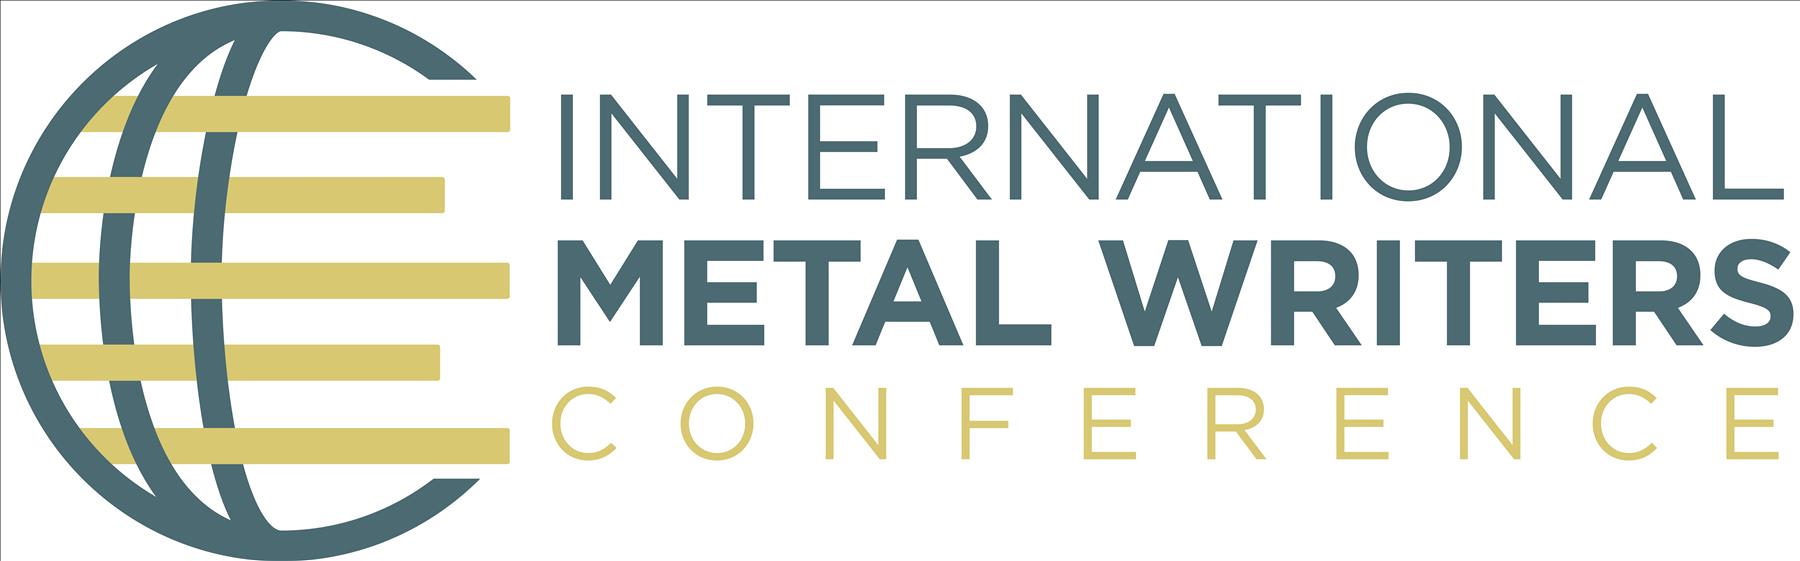 International Metal Writers Conference- Vancouver May 28-29th, 2017